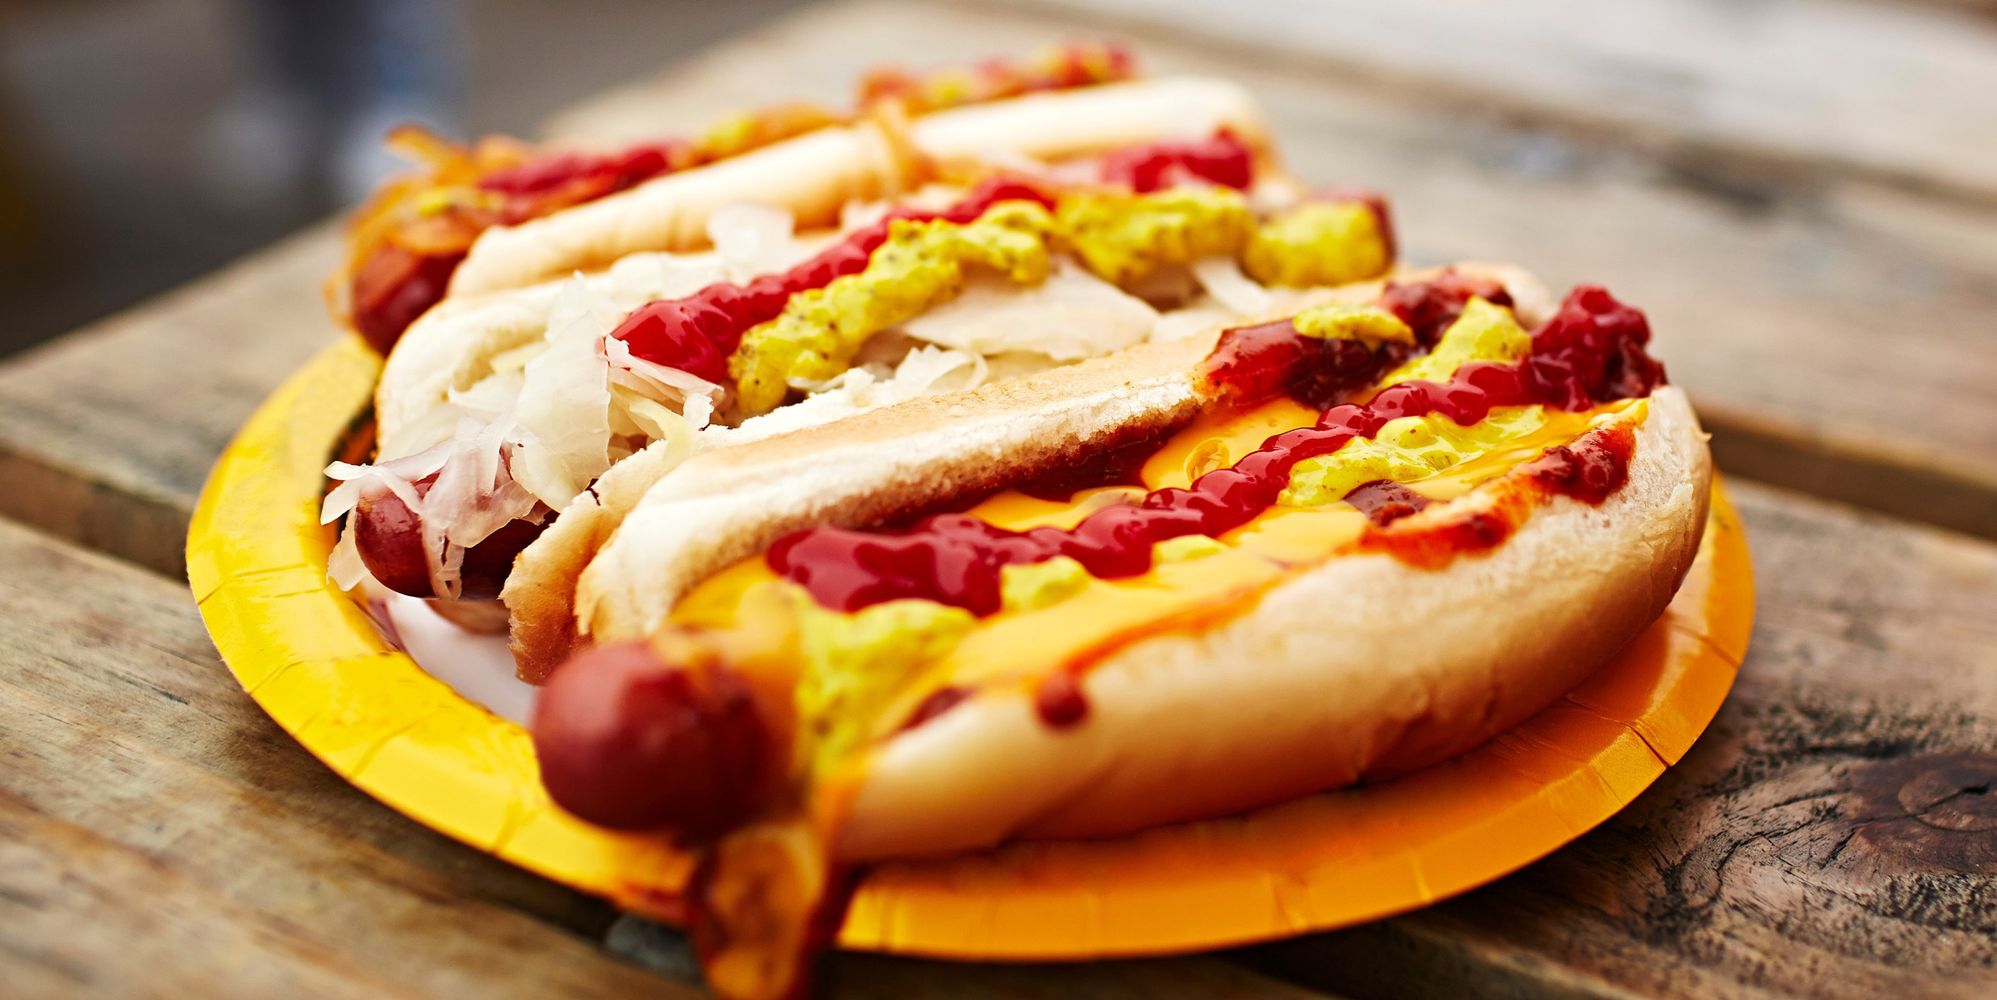 Here's Where To Get A Free Hot Dog On National Hot Dog Day, July 23